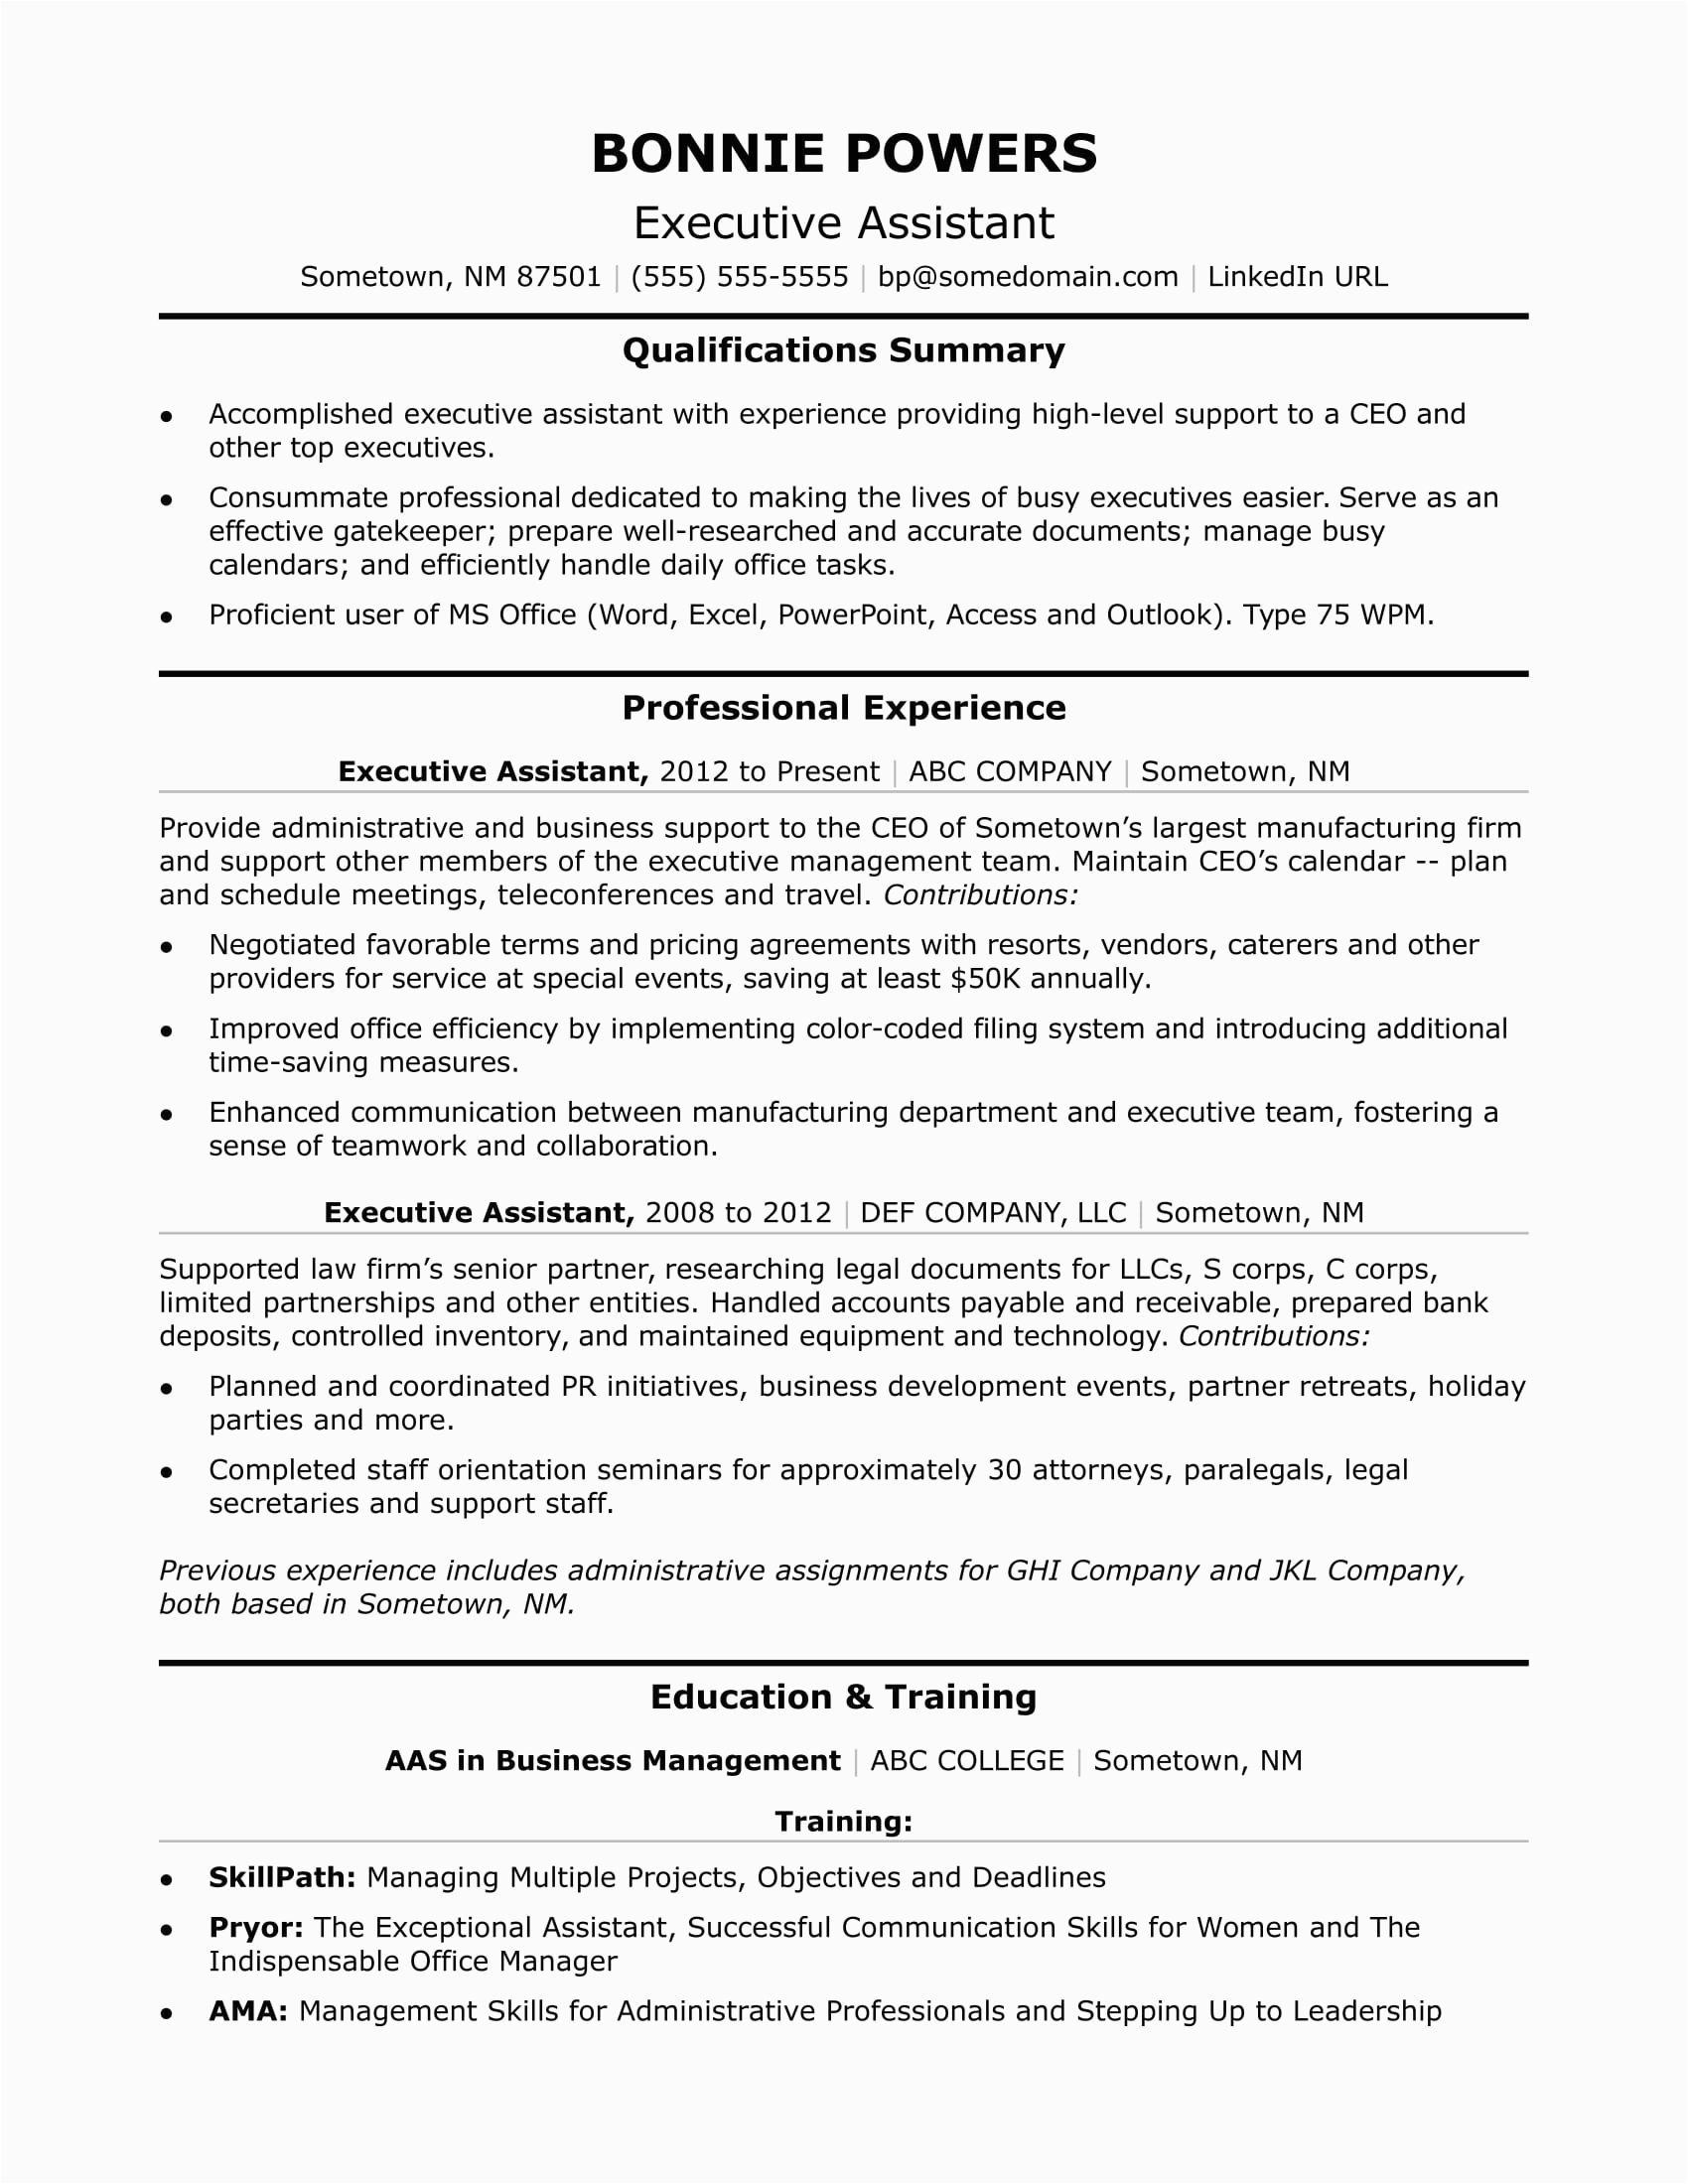 Summary Of Qualifications Sample Resume for Administrative assistant Executive Administrative assistant Resume Sample